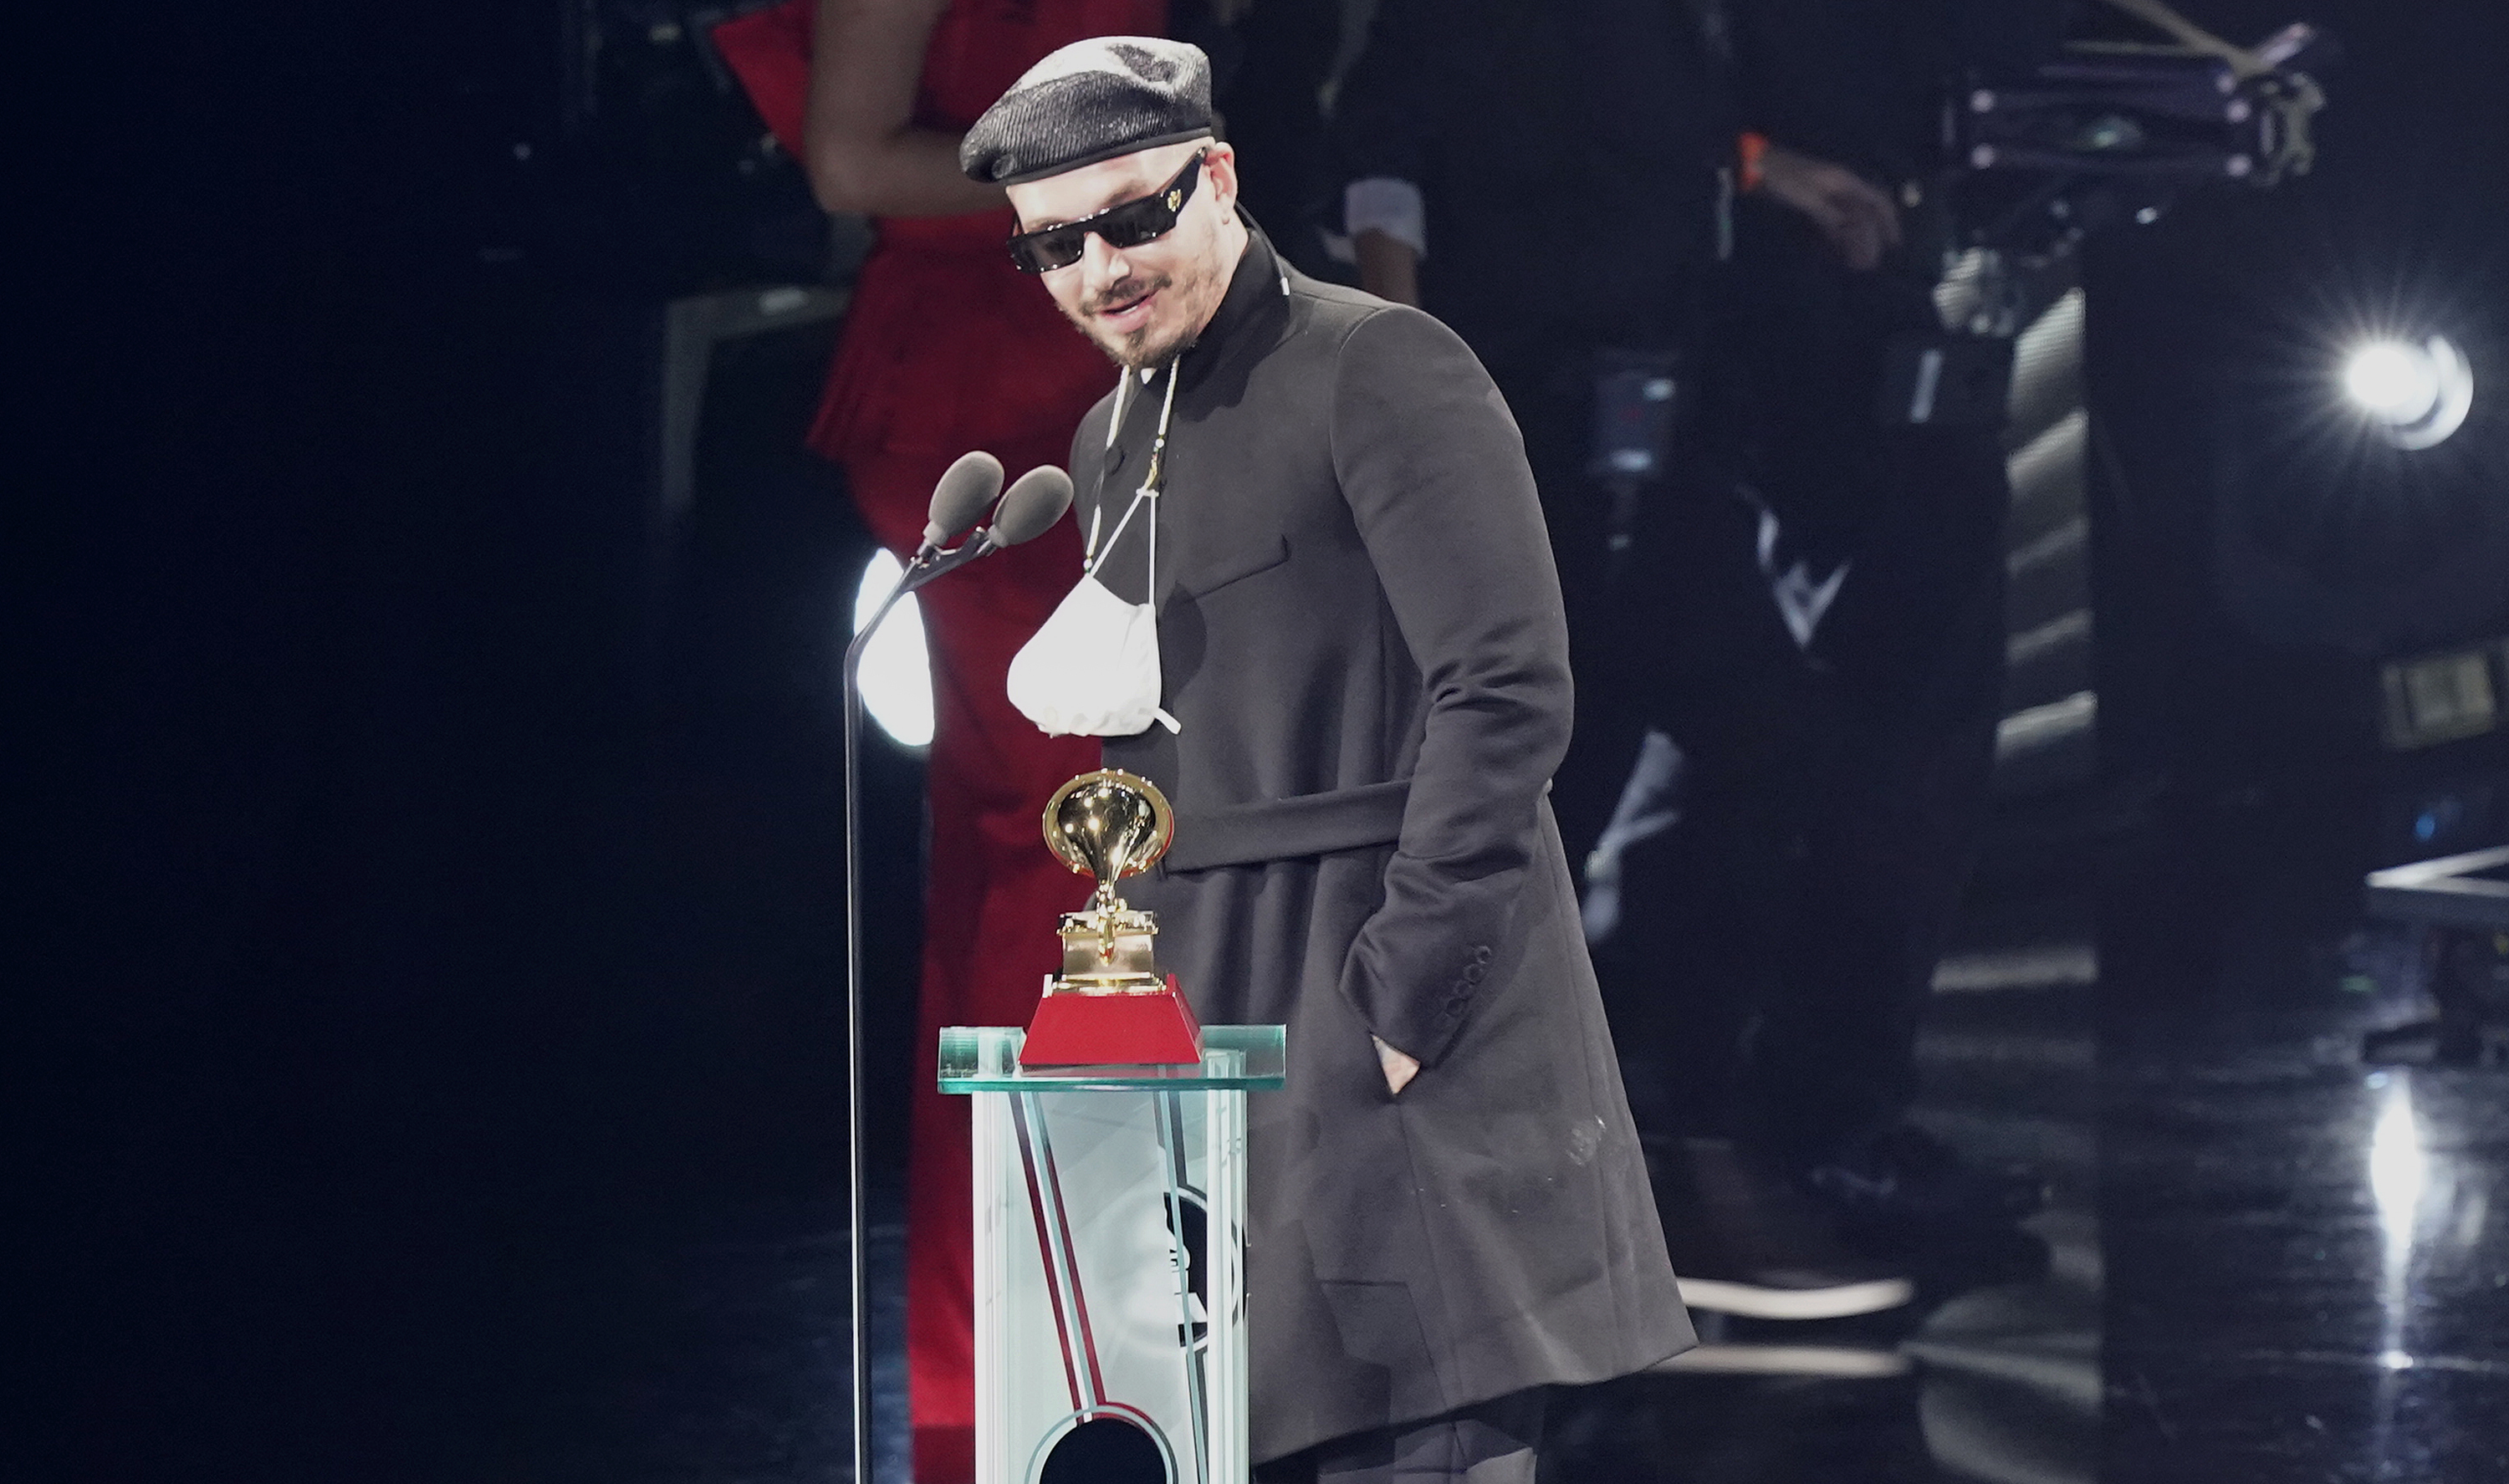 J Balvin accepts the award for best urban music album for "Colores" at the 21st Latin Grammy Awards, airing on Thursday, Nov. 19, 2020, at American Airlines Arena in Miami. (AP Photo/Marta Lavandier)